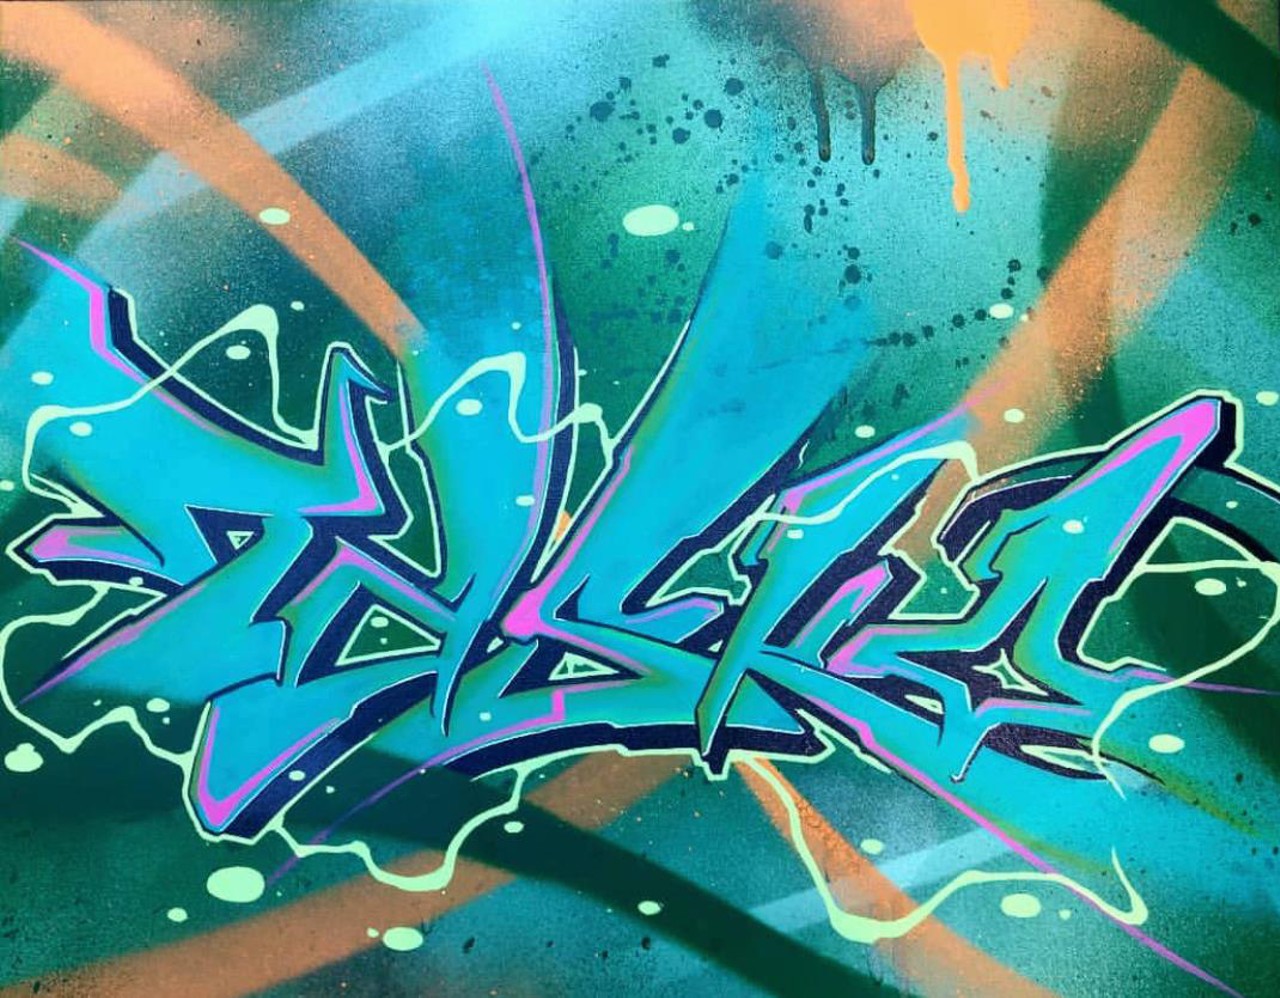 See some more graffiti at Caf&eacute; HeyCaf&eacute; Hey is just a couple doors down from the Mergeculture gallery in Tampa Heights. So if you're going to see Part 1 at Mergeculture, then you might as well see TASKO's first solo exhibit at Caf&eacute; HeySat., Feb. 16
Photo via photocredit